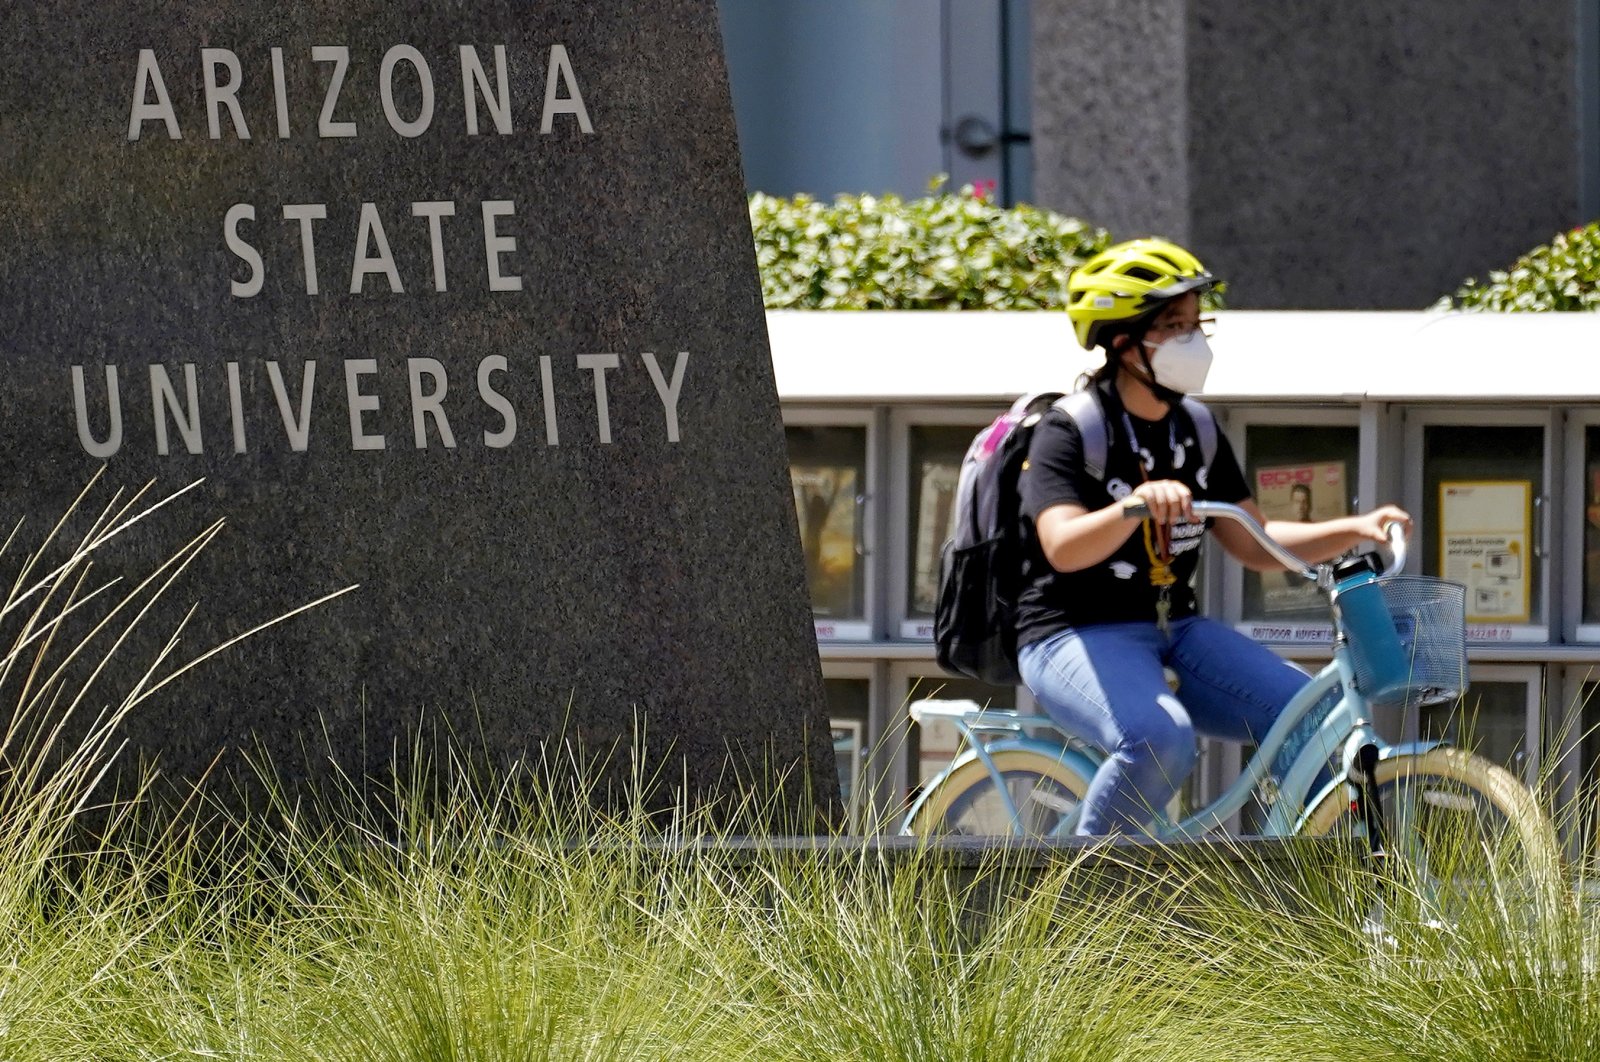 A cyclist crosses an intersection on the campus of Arizona State University, in Tempe, Arizona, Sept. 1, 2020. (AP Photo)